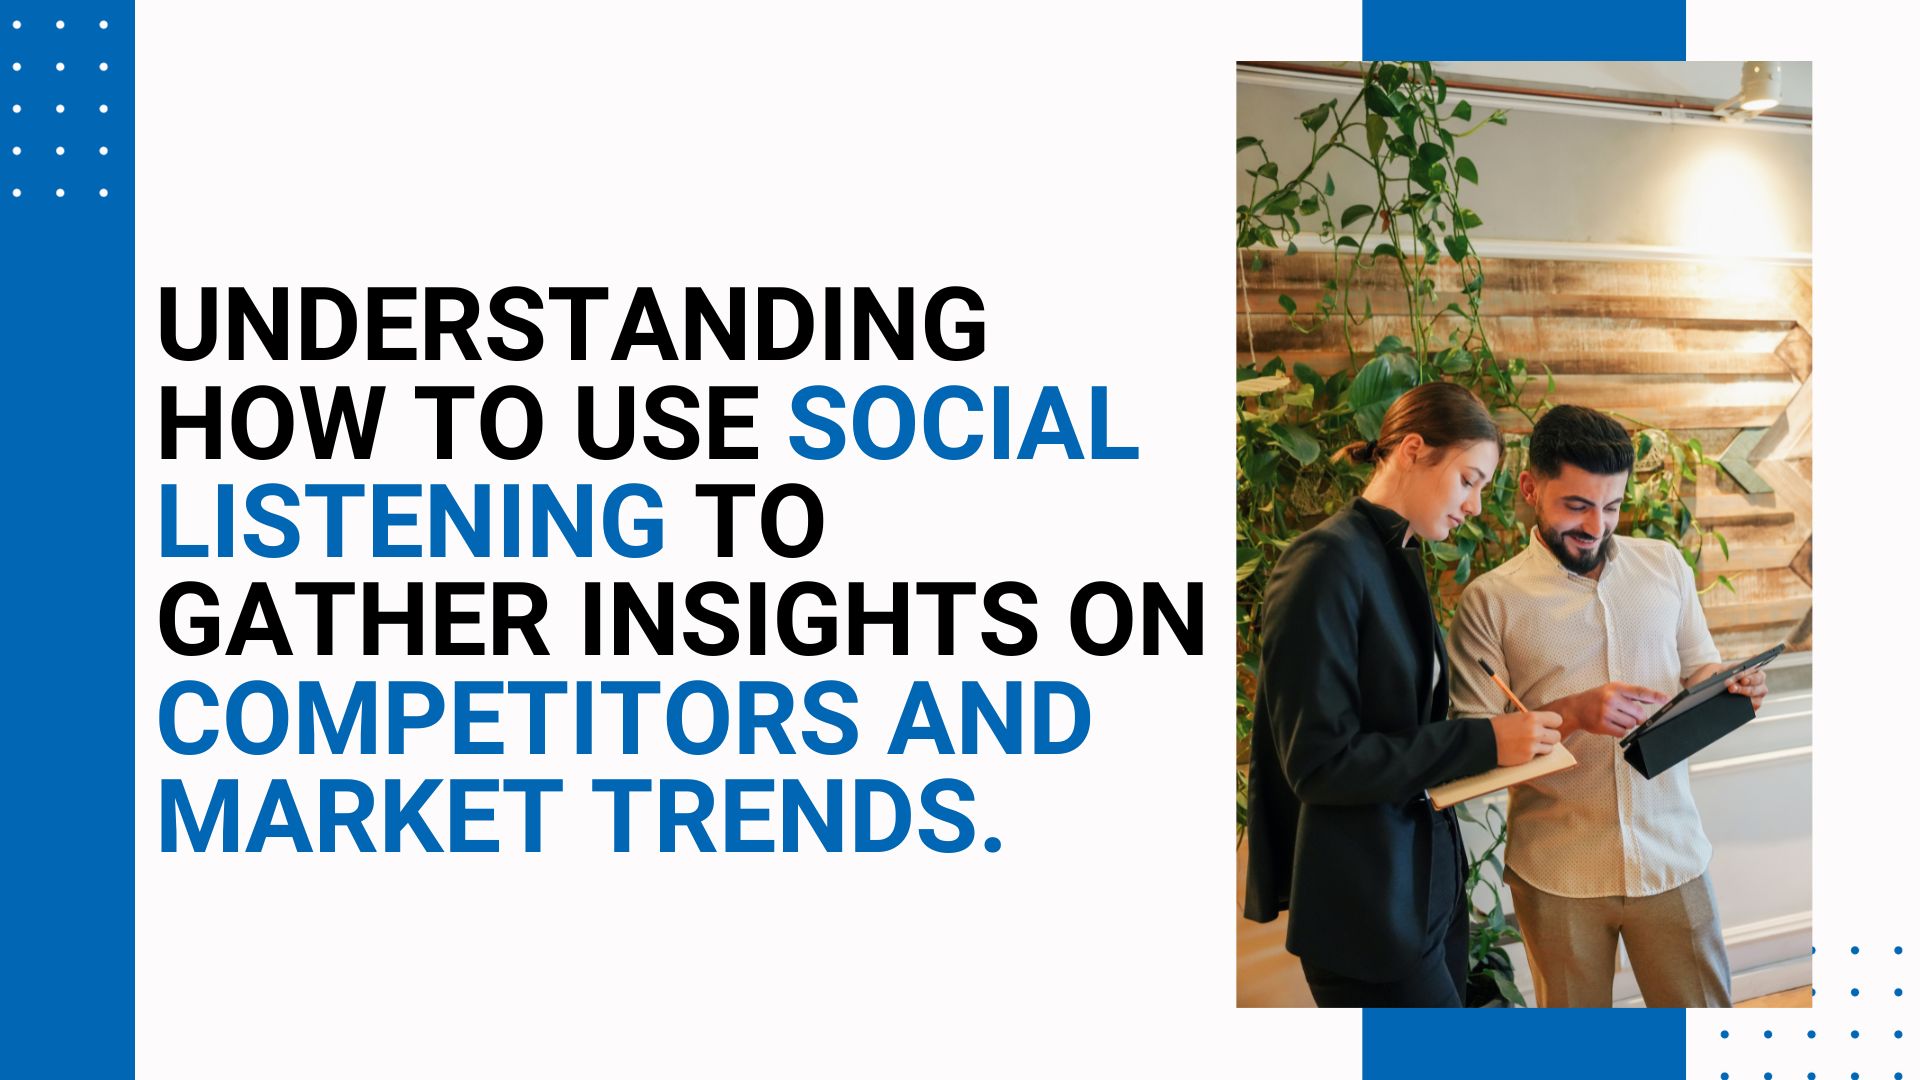 Understanding how to use social listening to gather insights on competitors and market trends.